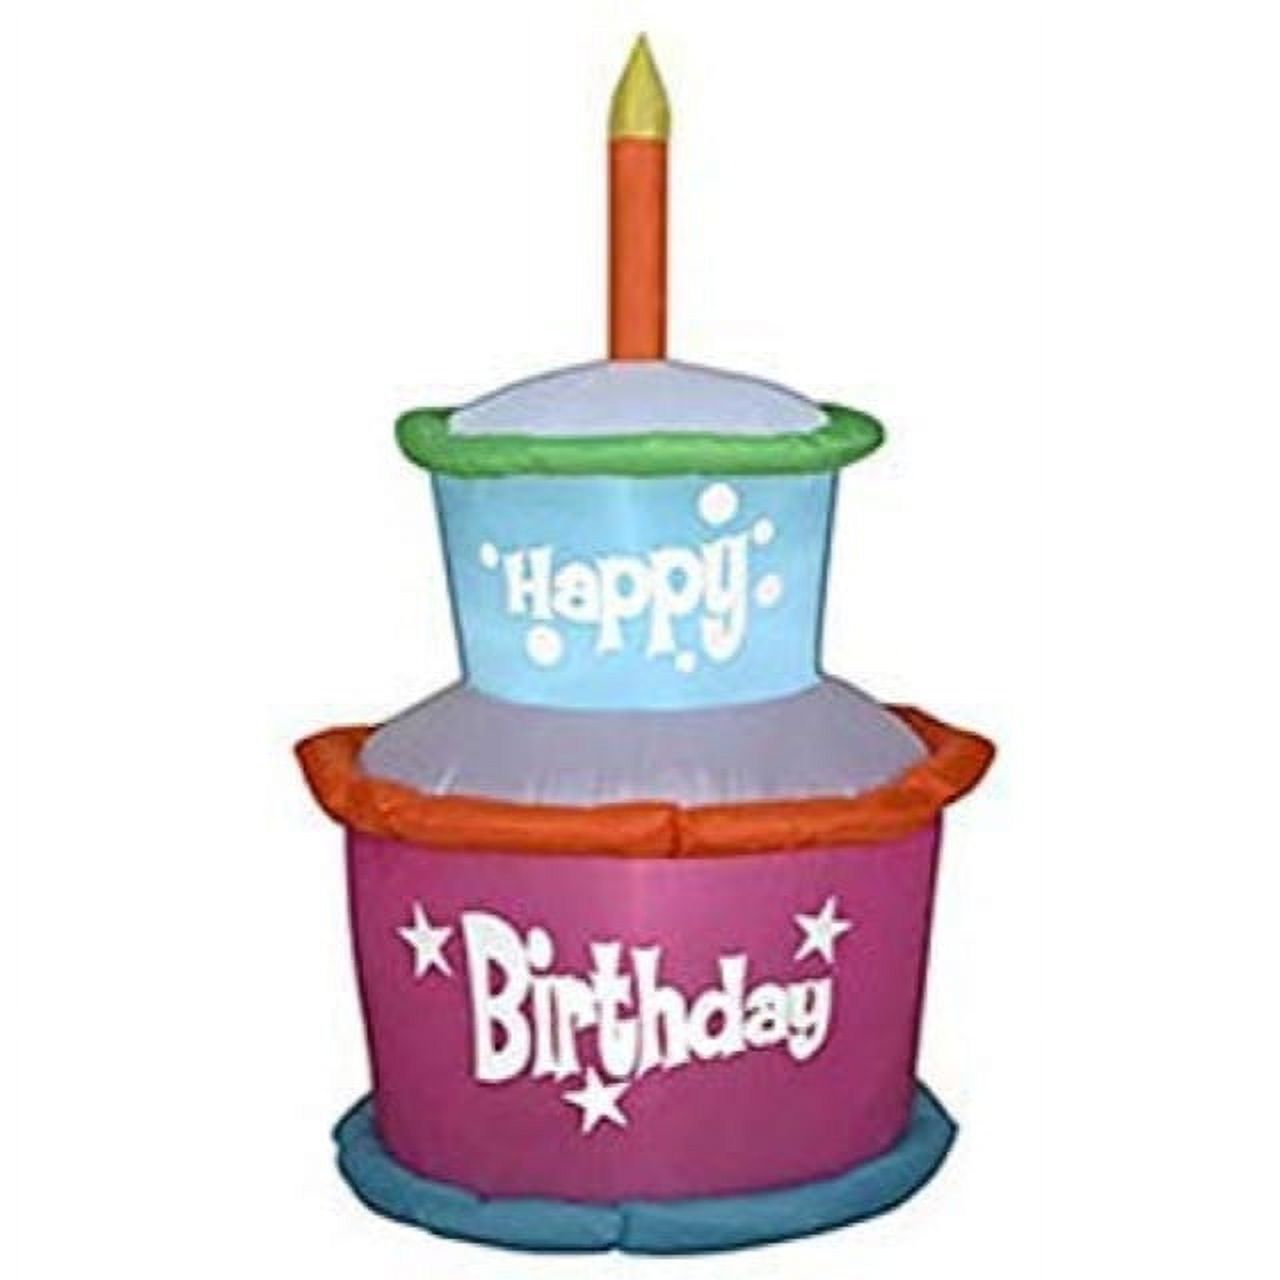 gemmy industries airblown inflatable happy birthday cake with candles - image 1 of 2